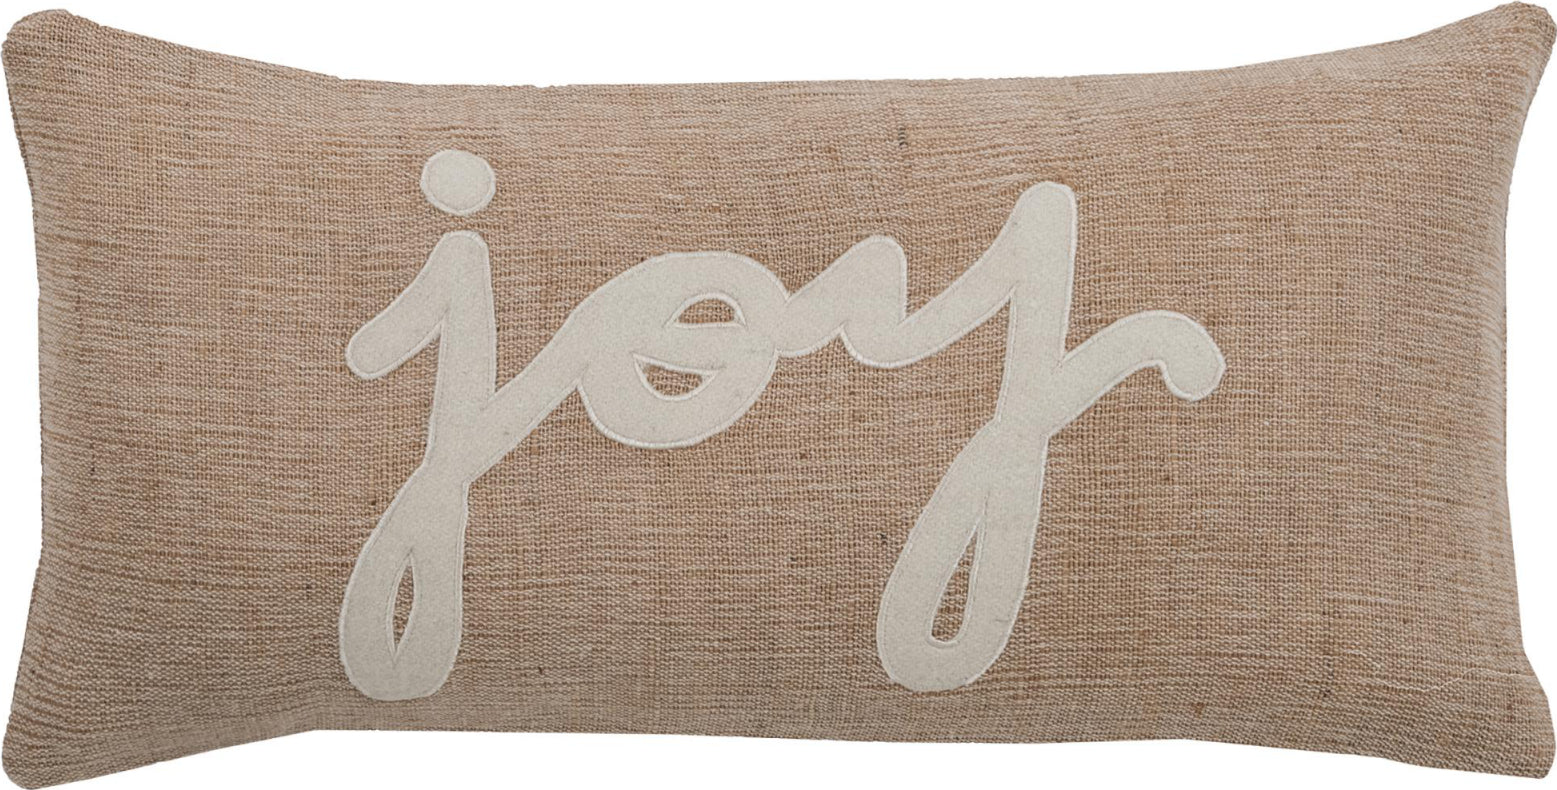 Rizzy Pillows T06152 Beige